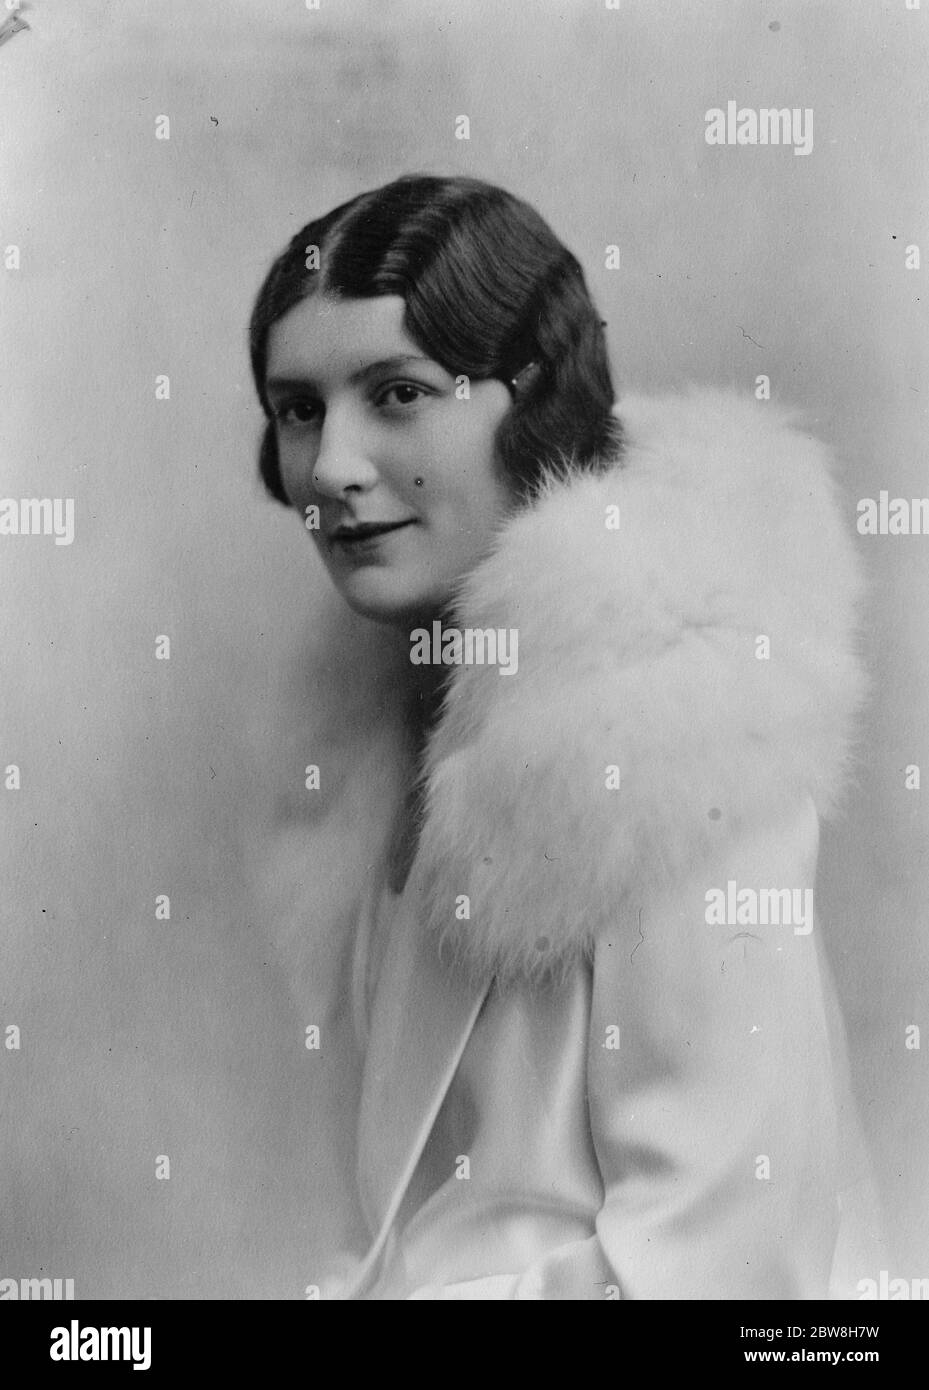 Sir Robert Gower 's daughter engaged . Lady in waiting to Princess Marie Clothilde of Belgium . Miss Dorothy Vaughan Gower . 27 August 1931 Stock Photo